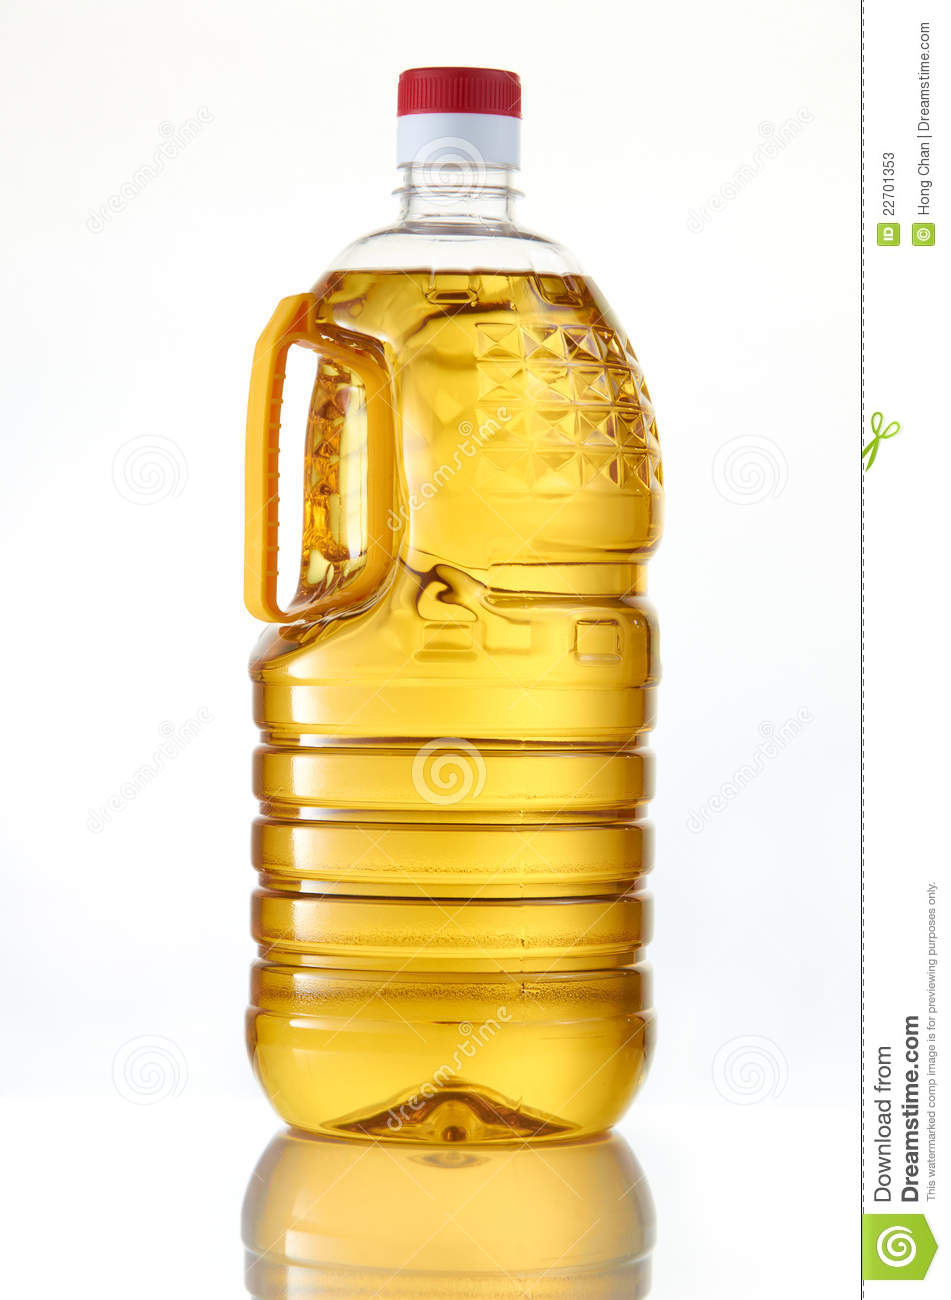 Cooking Oil Stock Photos   Image  22701353